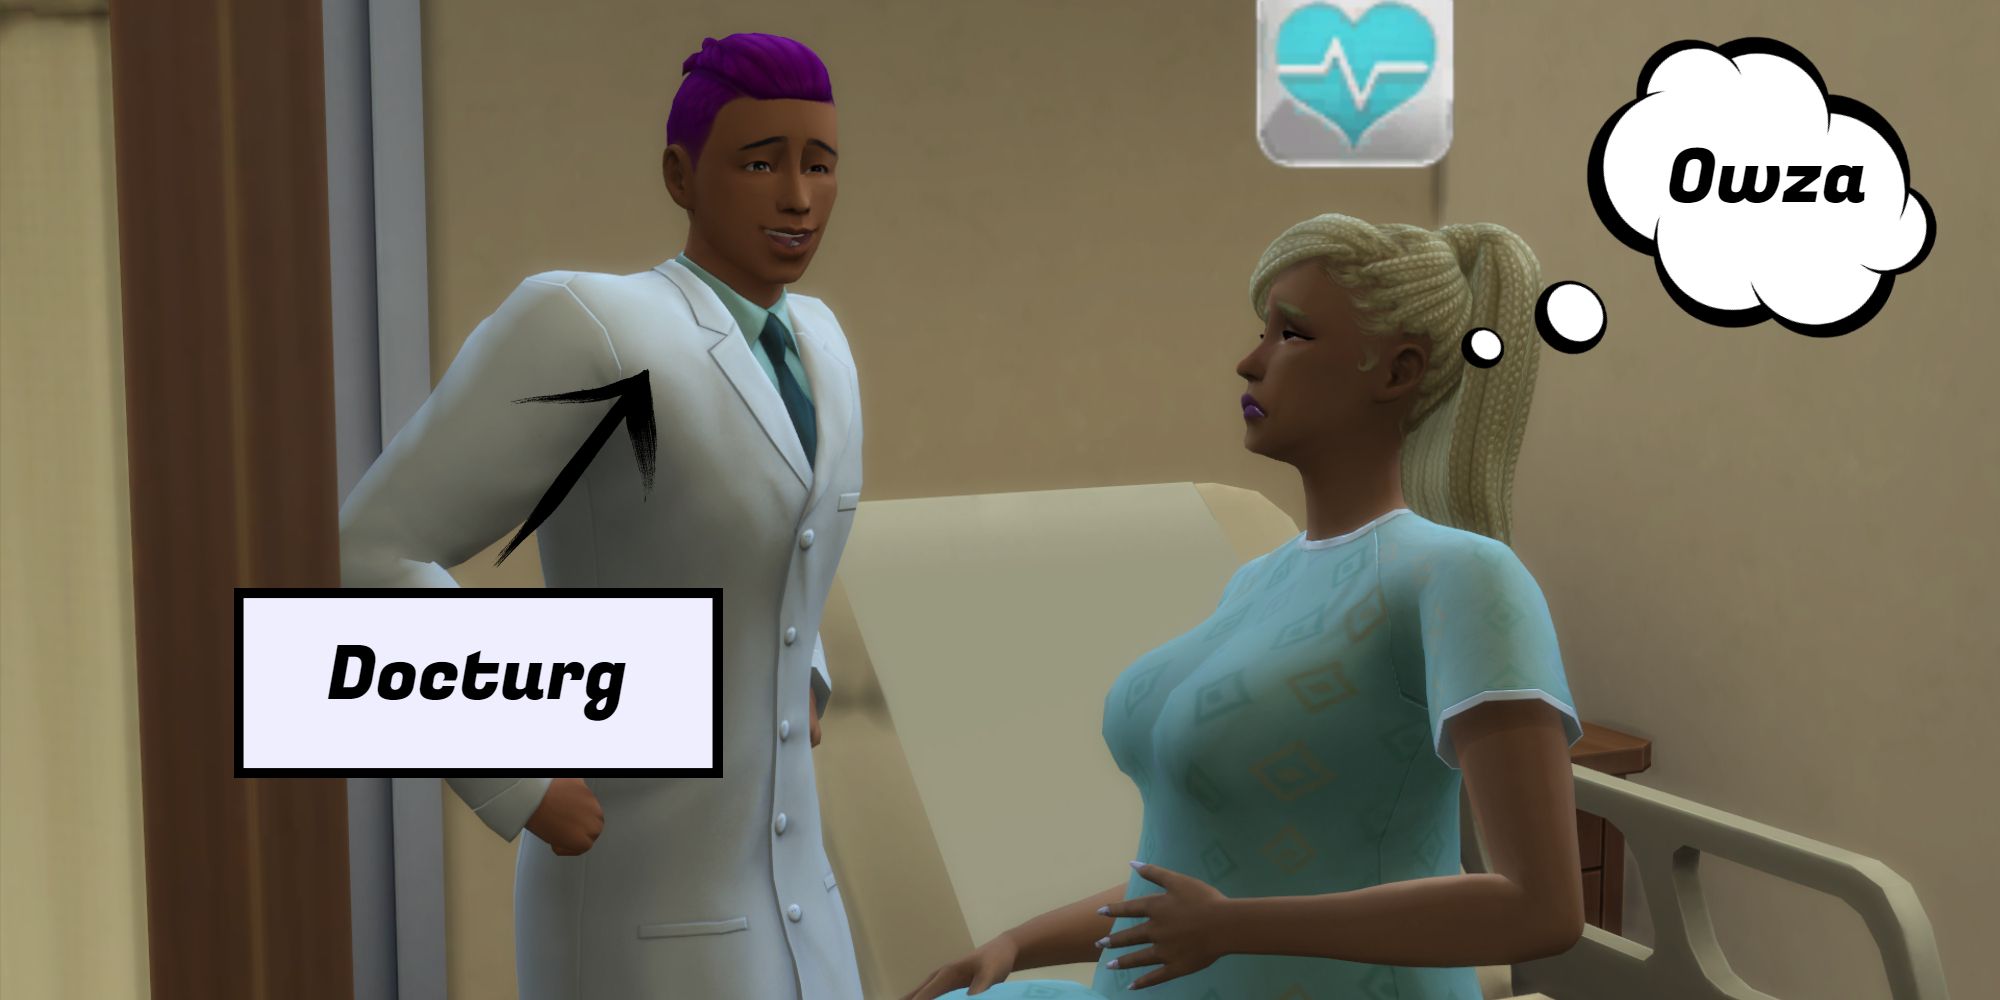 Docturg is the Simlish word for Doctor